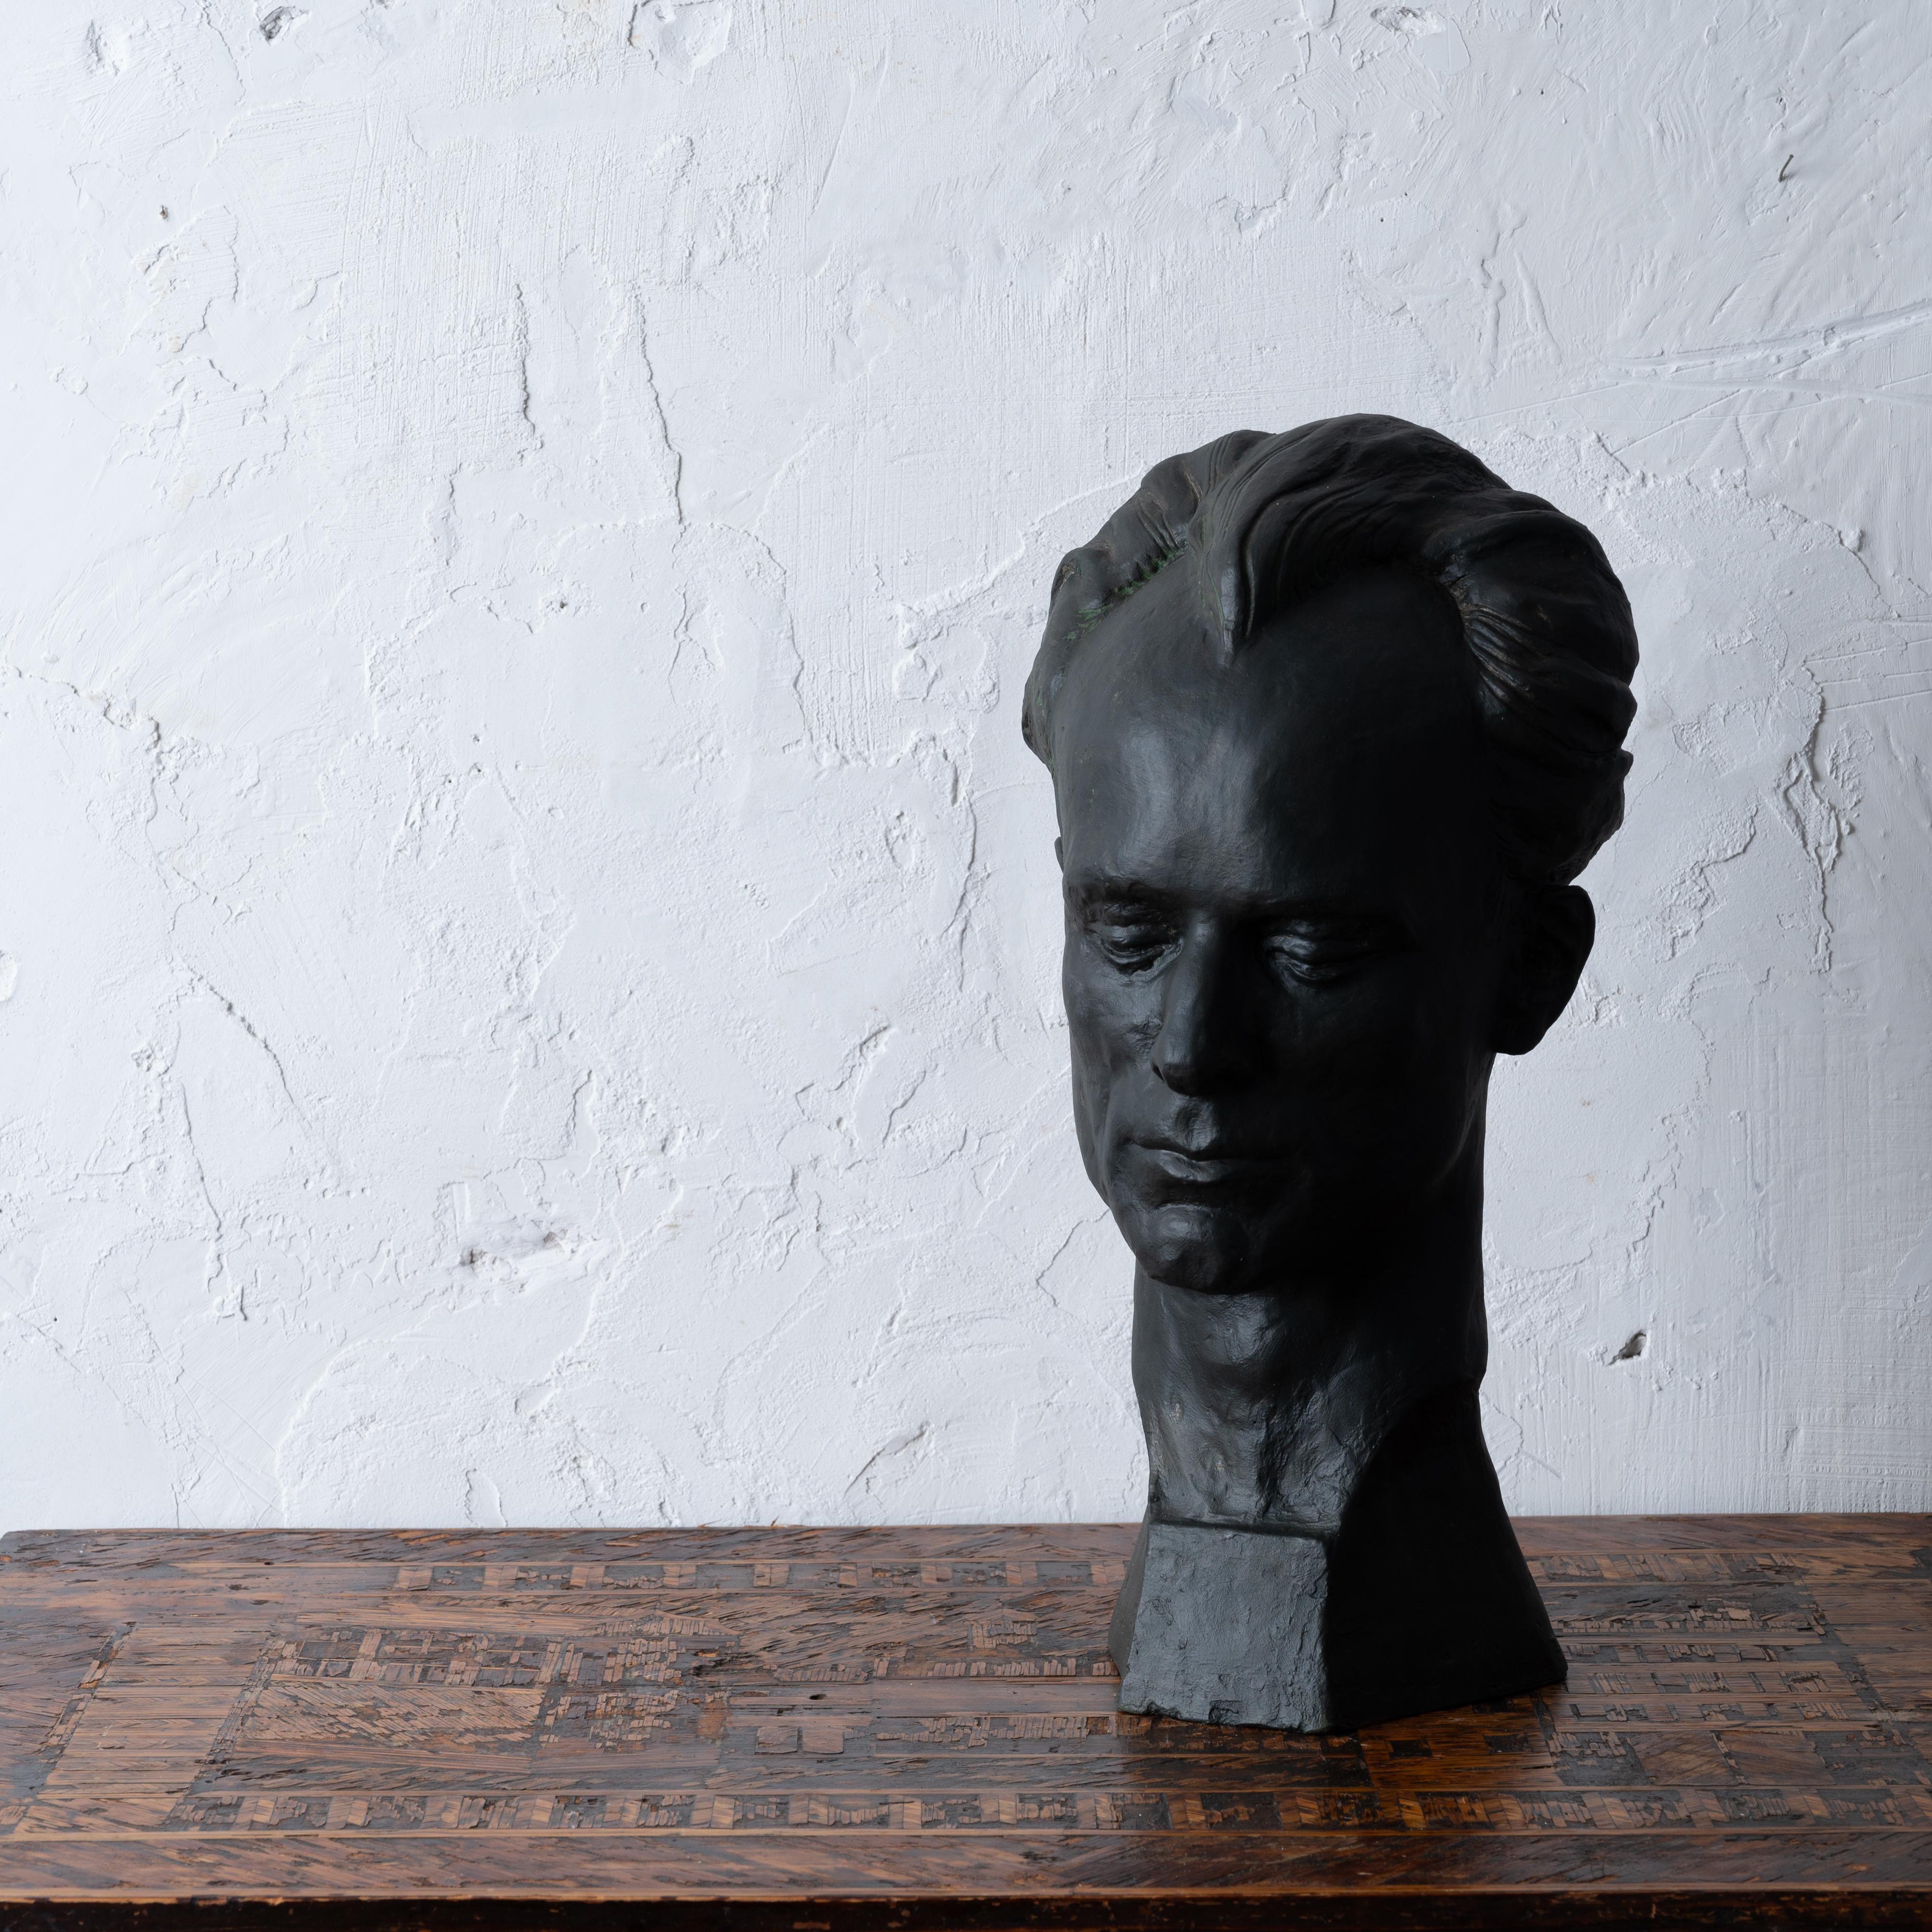 Florence Fiore
(American, 1905-1999)

A from-life plaster bust of American composer Rudolph Gruen, circa 1930s.

10 inches wide by 11 inches deep by 20 inches tall

Florence Reeve Fiore was a portrait artist and sculptor who was active on the east